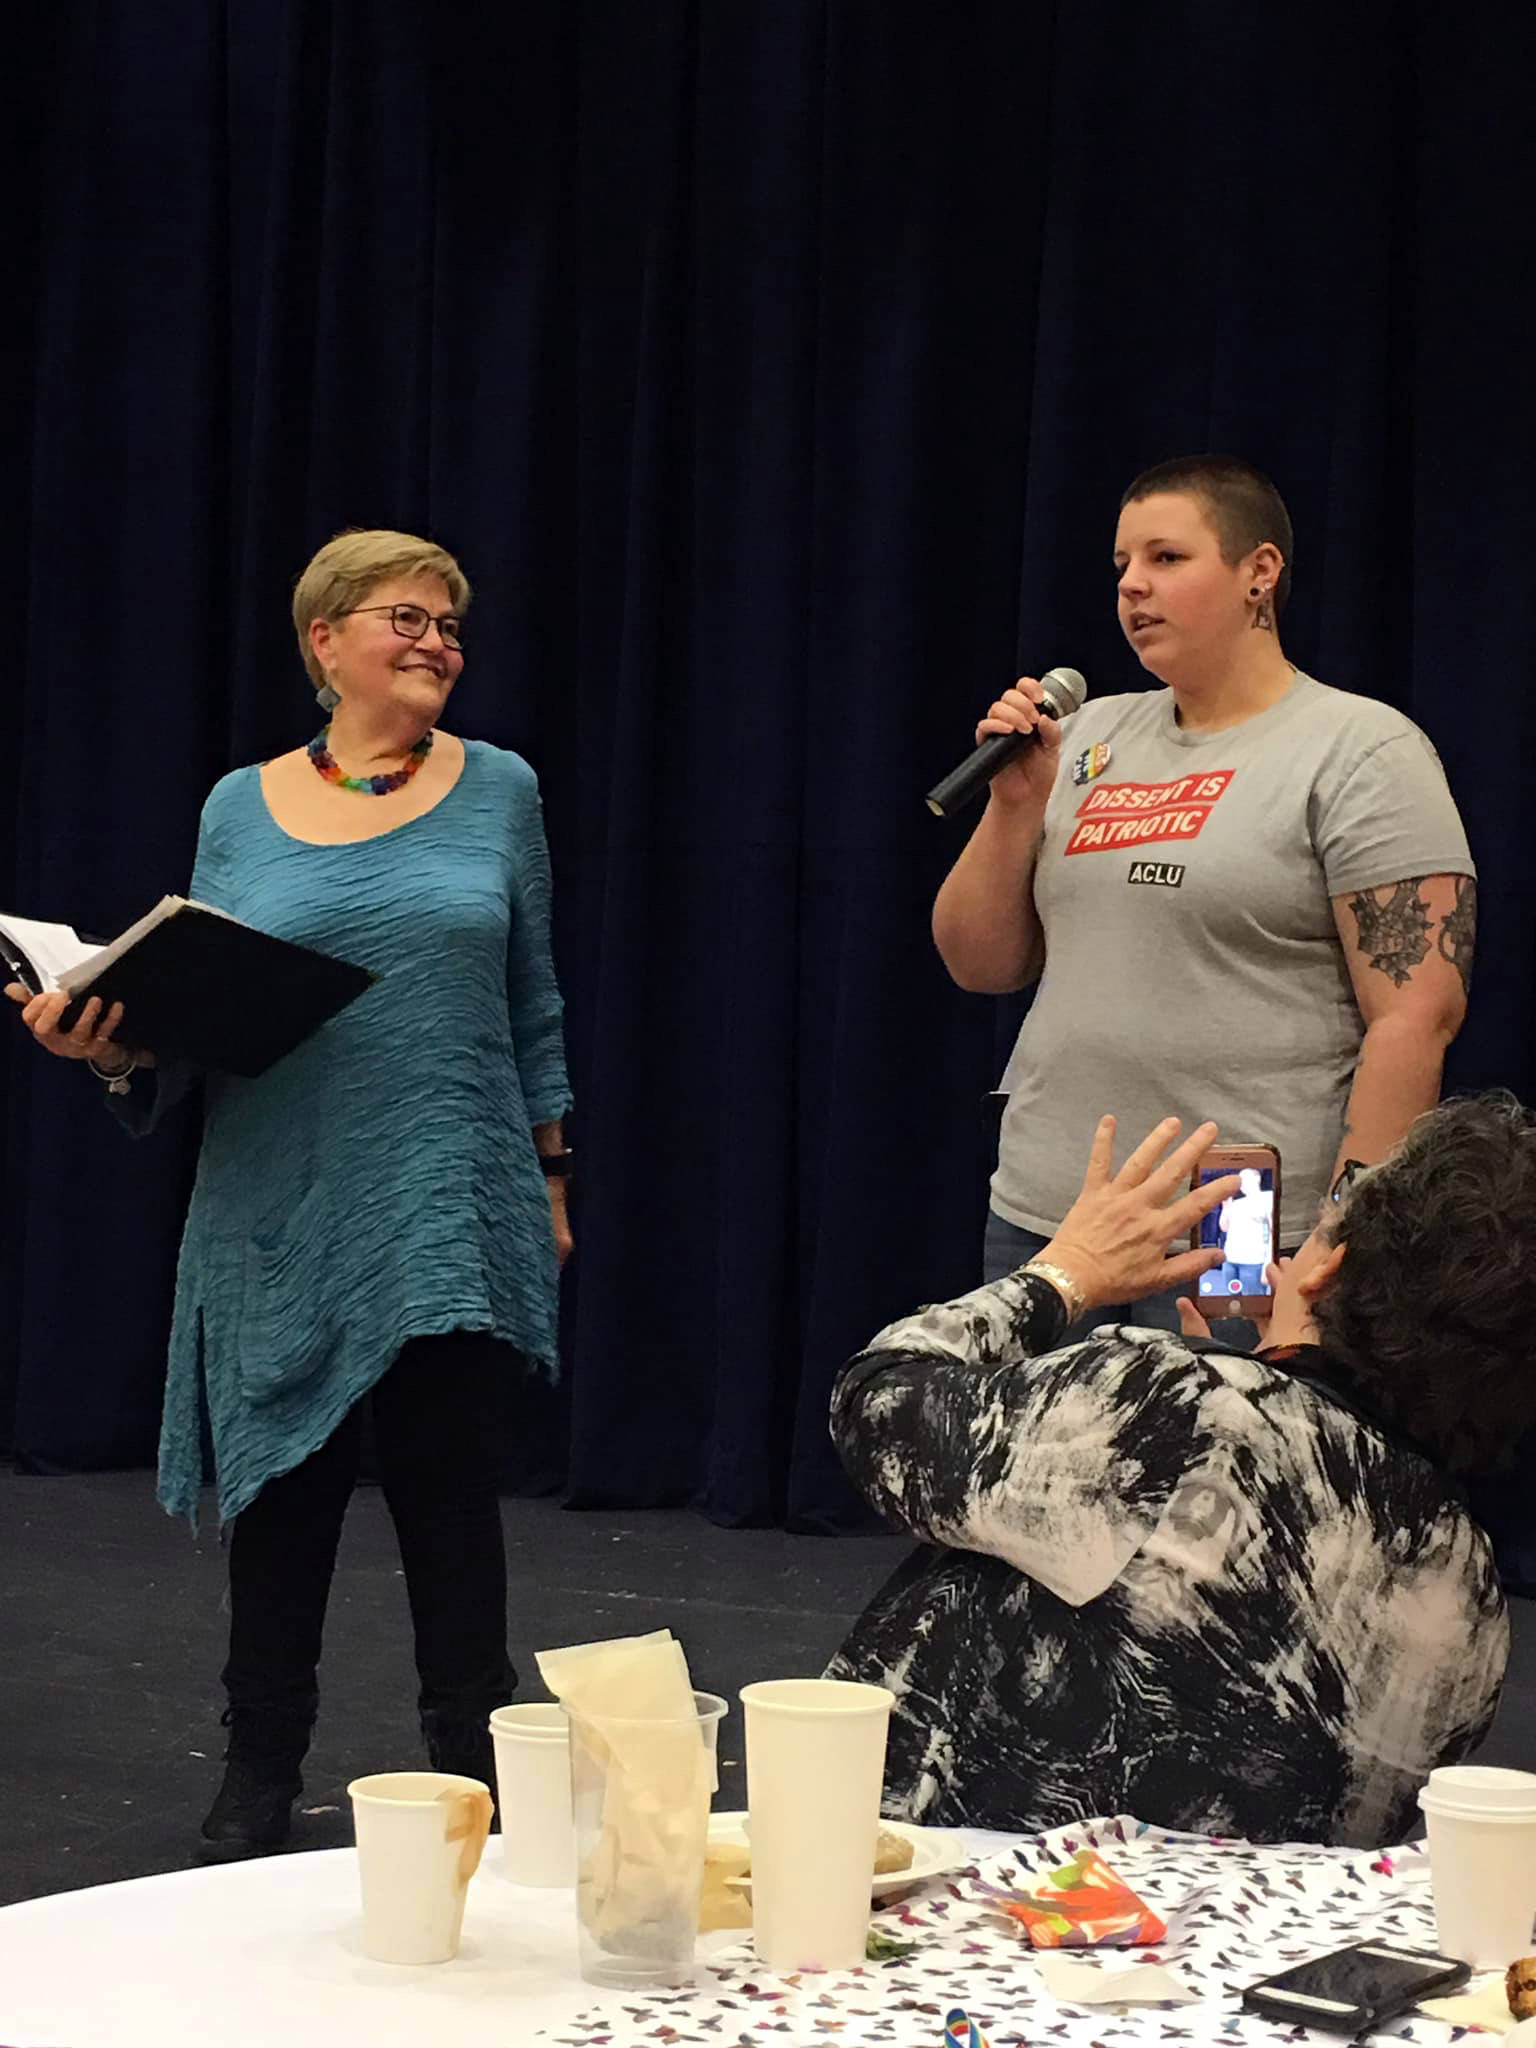 Stonewall 50 co-coordinators Maureen Longworth, left, and Tayler Shae, right, talk onstage during the Stonewall;; 50 Tea & Dance event Saturday, Feb. 9, 2019. (Courtesy Photo | For Stonewall 50 Project)